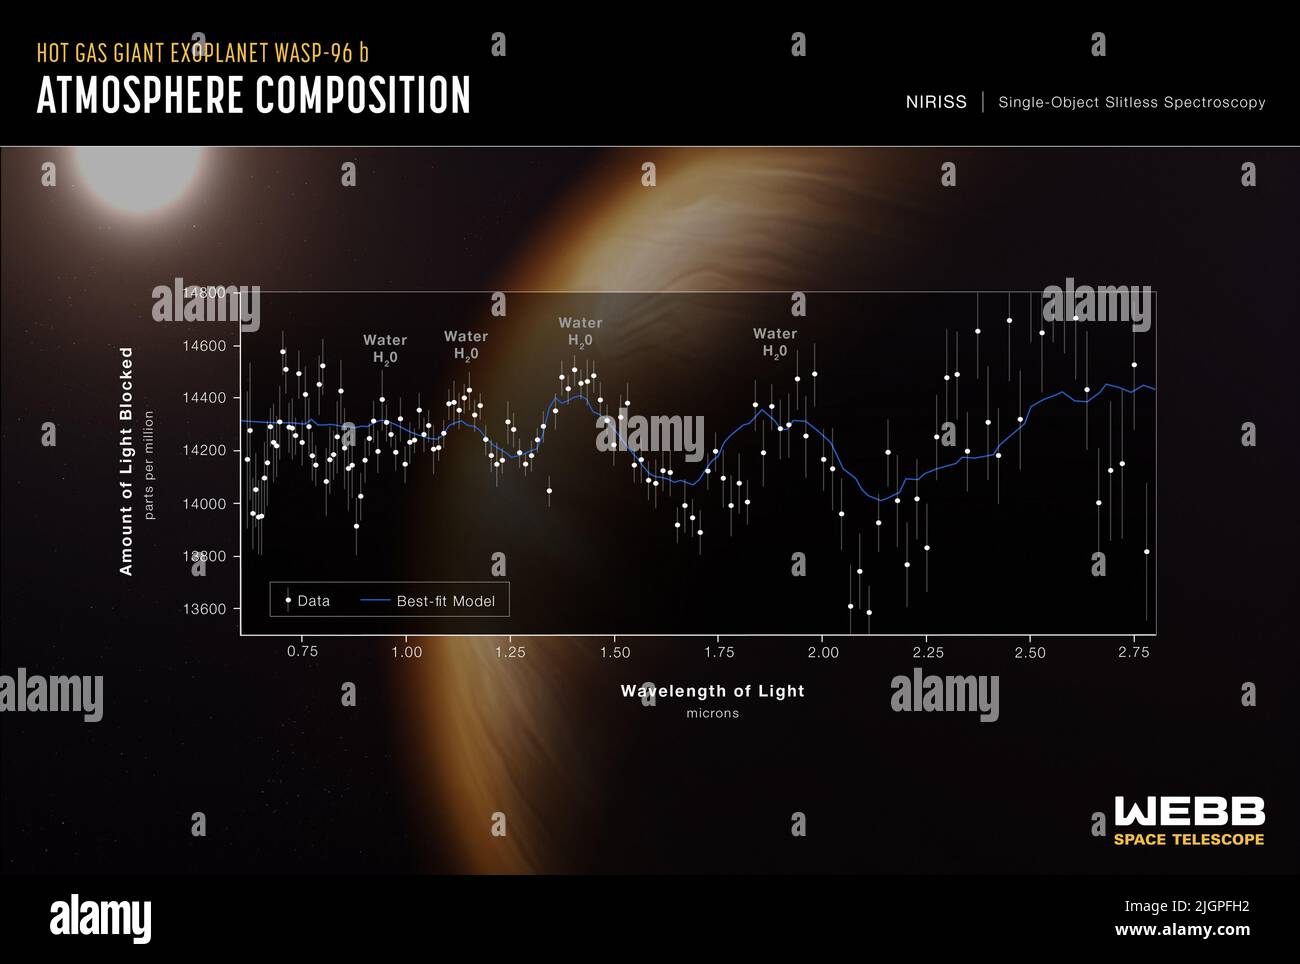 A transmission spectrum made from a single observation using Webb's Near-Infrared Imager and Slitless Spectrograph (NIRISS) reveals atmospheric characteristics of the hot gas giant exoplanet WASP-96 b. A transmission spectrum is made by comparing starlight filtered through a planet's atmosphere as it moves across the star to the unfiltered starlight detected when the planet is beside the star. Each of the 141 data points (white circles) on this graph represents the amount of a specific wavelength of light that is blocked by the planet and absorbed by its atmosphere. The background illustration Stock Photo